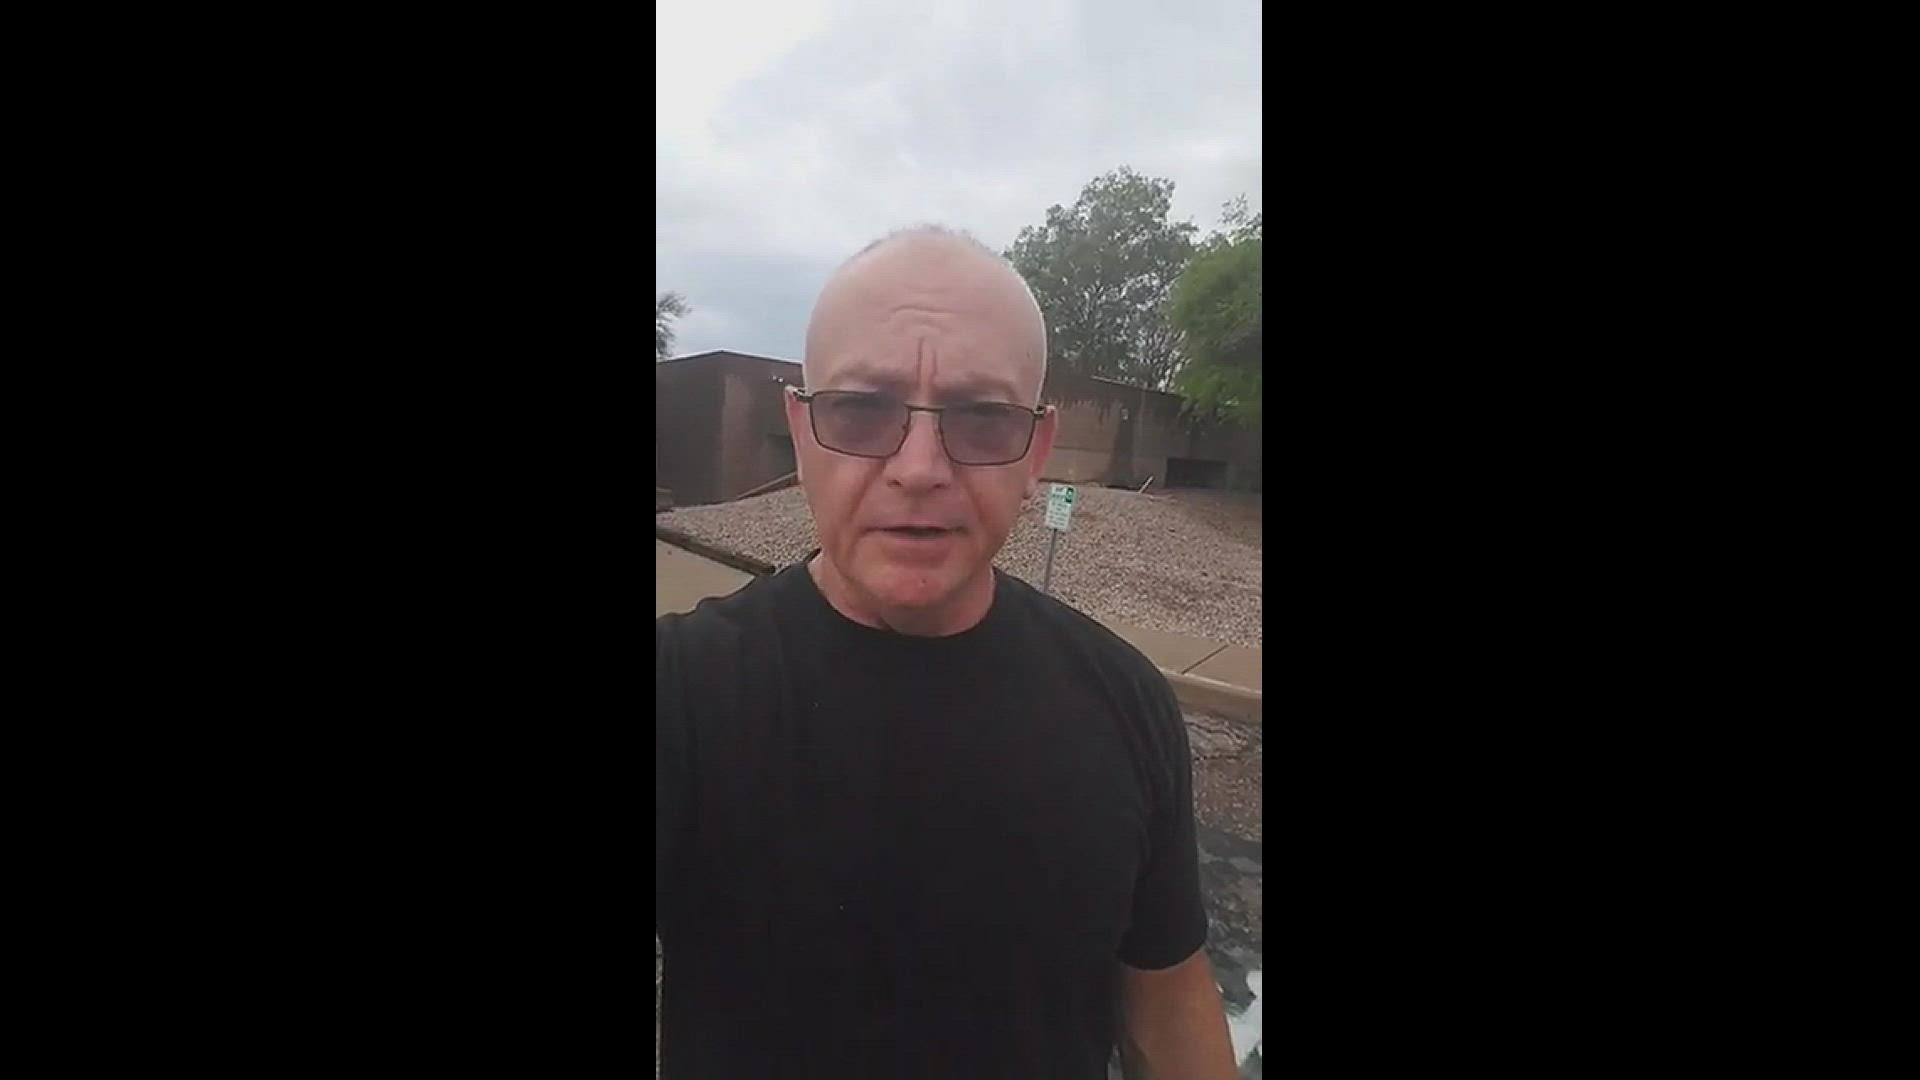 Gila Bend mayor Chris Riggs declared a State of Emergency for the community due to severe flooding.